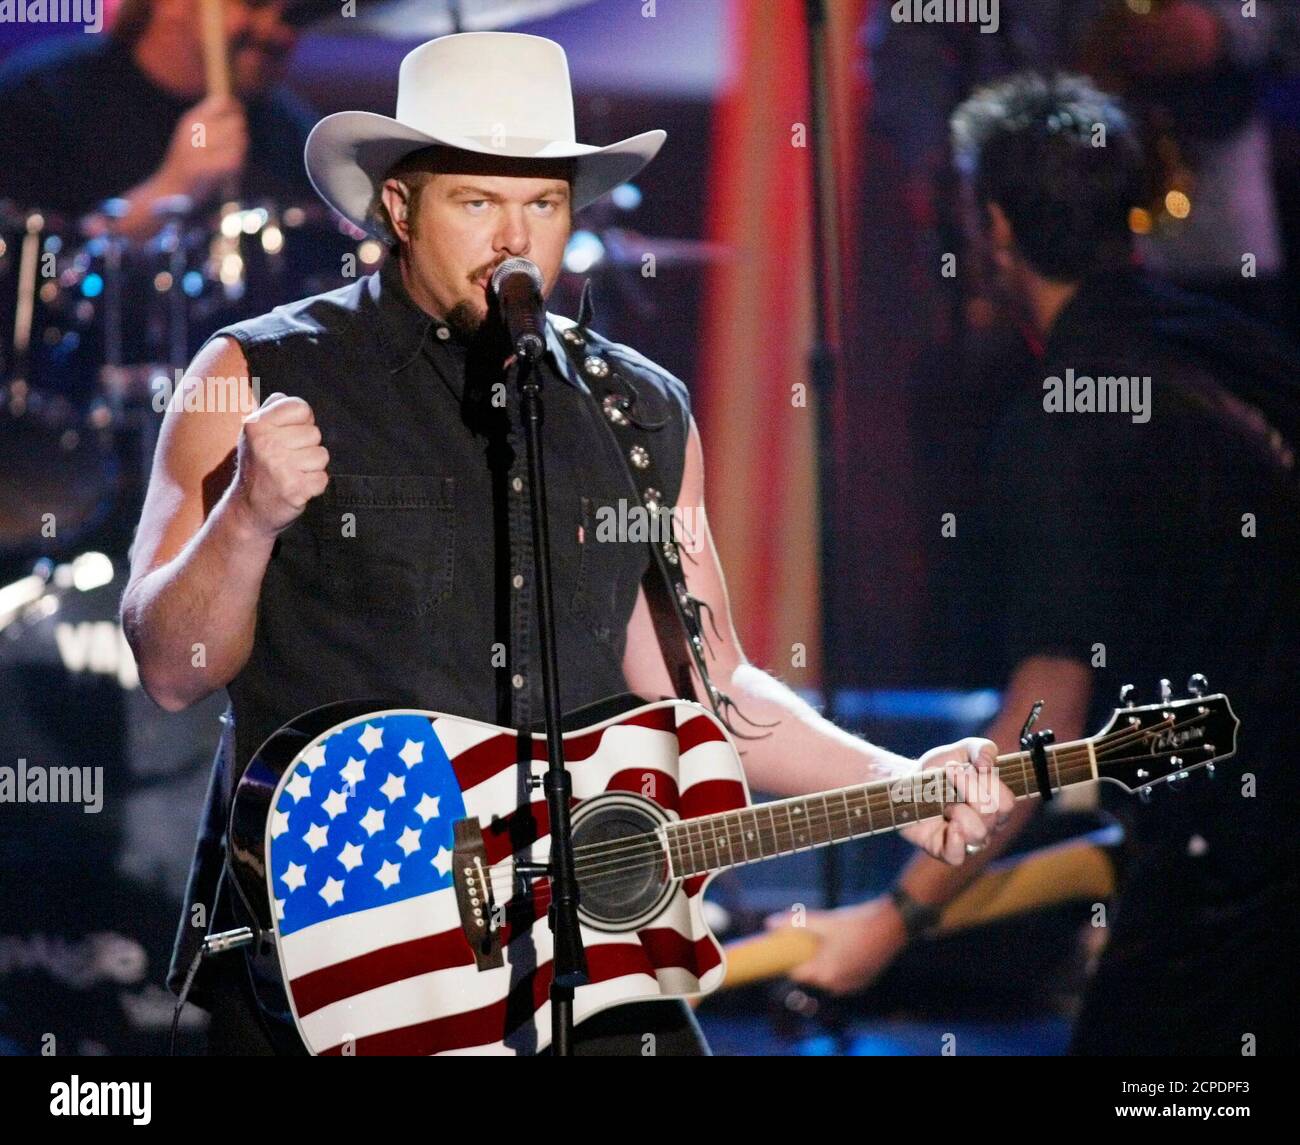 Country singer Toby Keith topped the U.S. pop charts July 2002 with his new featuring a controversial song celebrating the U.S. bombing of Afghanistan, "Courtesy of the Red, White and